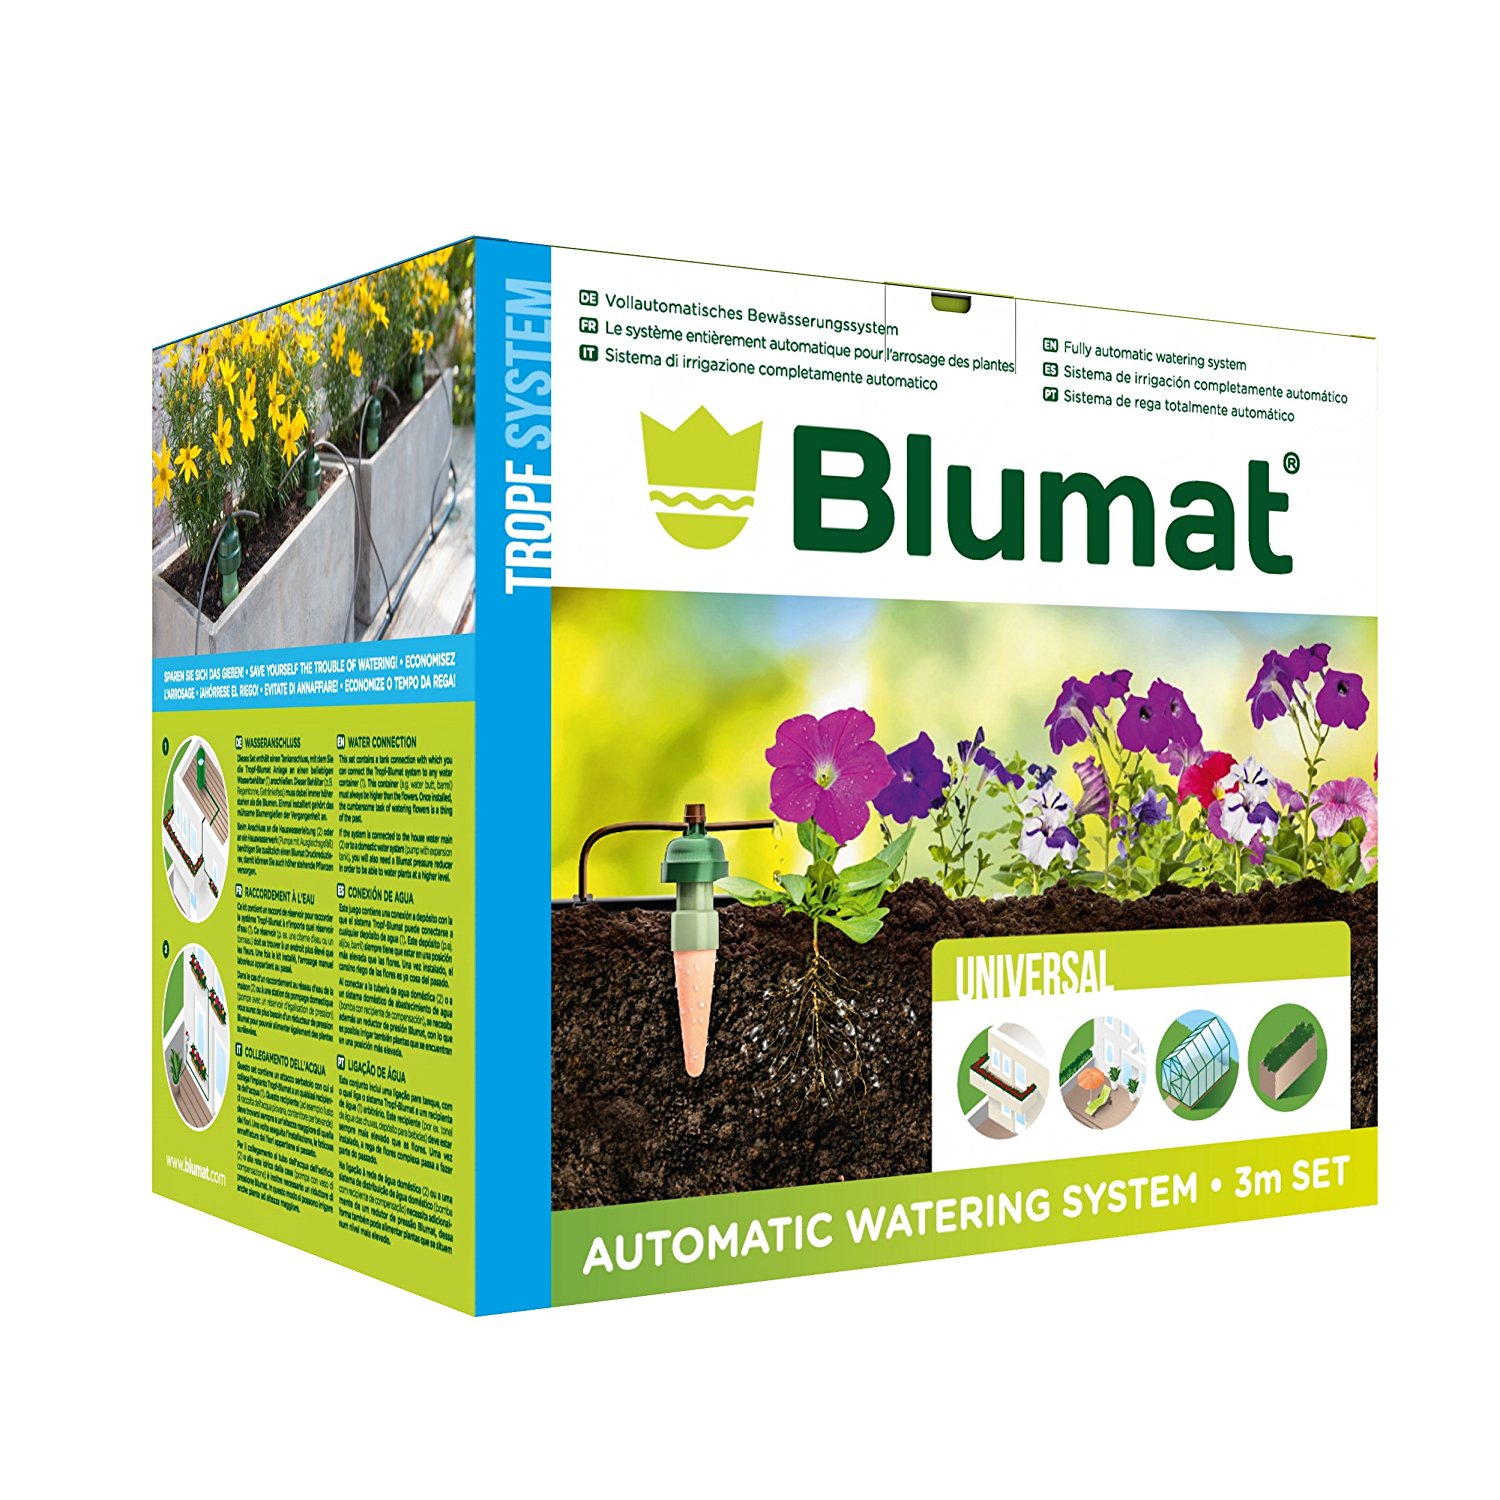 Blumat Automatic Watering Sensors Made in Austria 5 Plant Starter Drip System Great for all Plants 